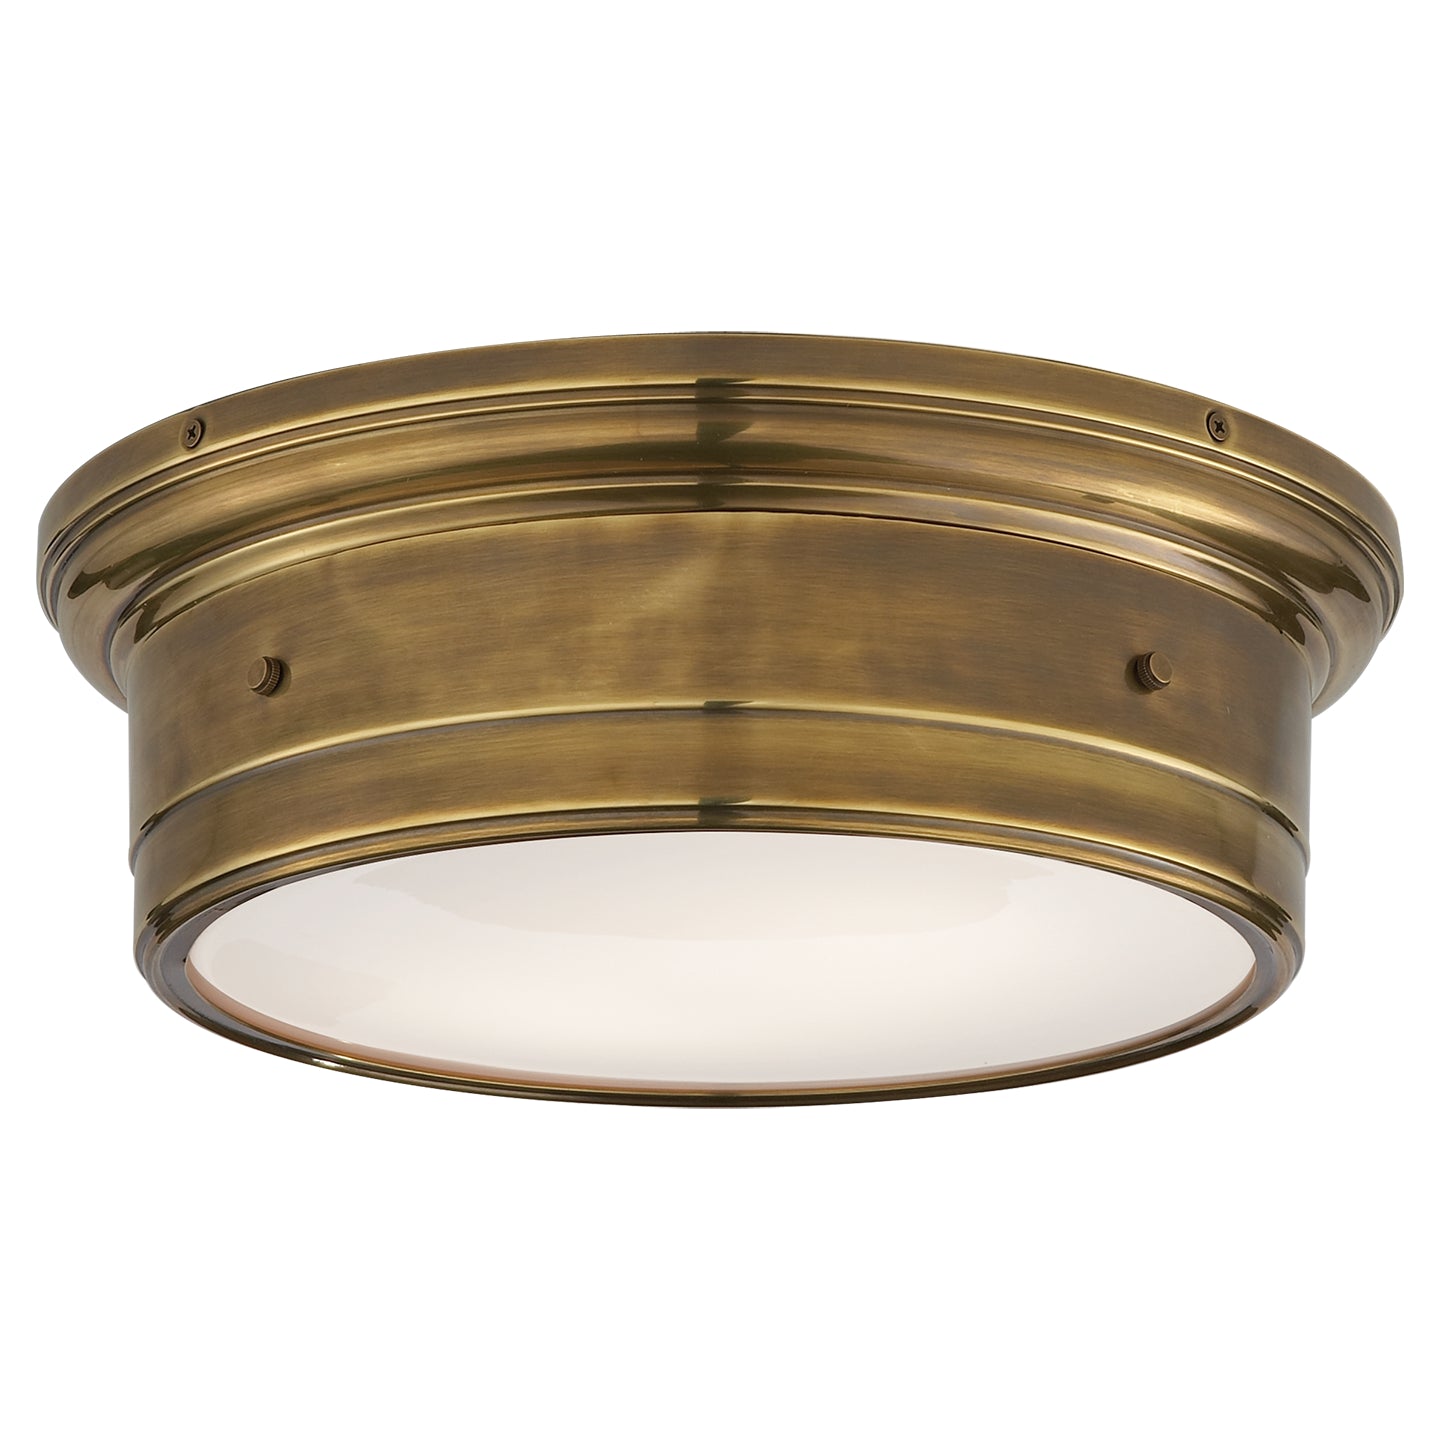 Load image into Gallery viewer, Visual Comfort Signature - SS 4016HAB-WG - Two Light Flush Mount - Siena2 - Hand-Rubbed Antique Brass
